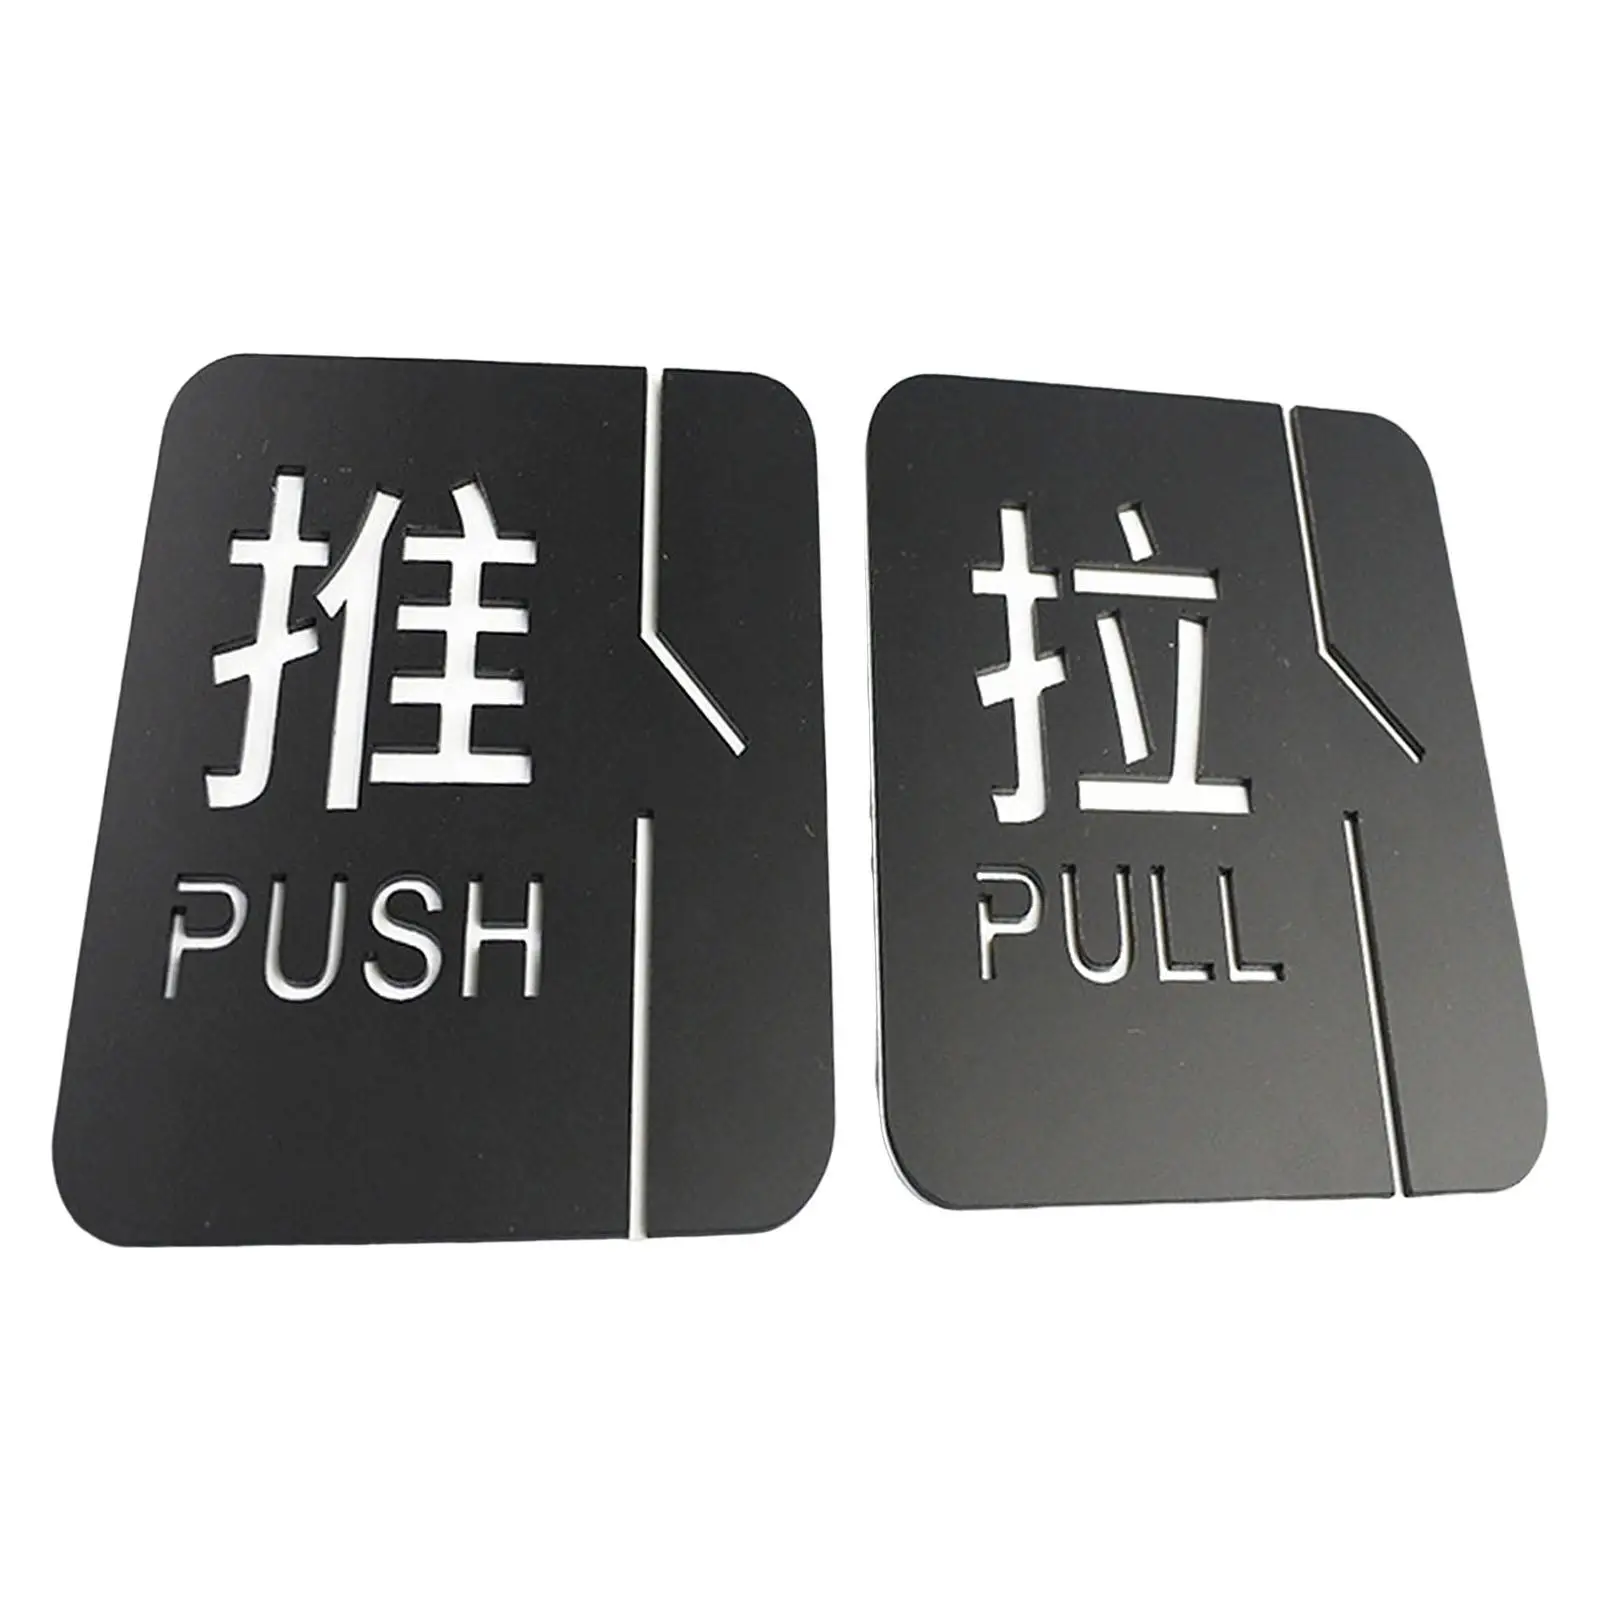 Acrylic Push Pull Door Stickers Sign with Adhesive Tape Fade Resistant Signage Signpost for Restaurant Cafes hotel